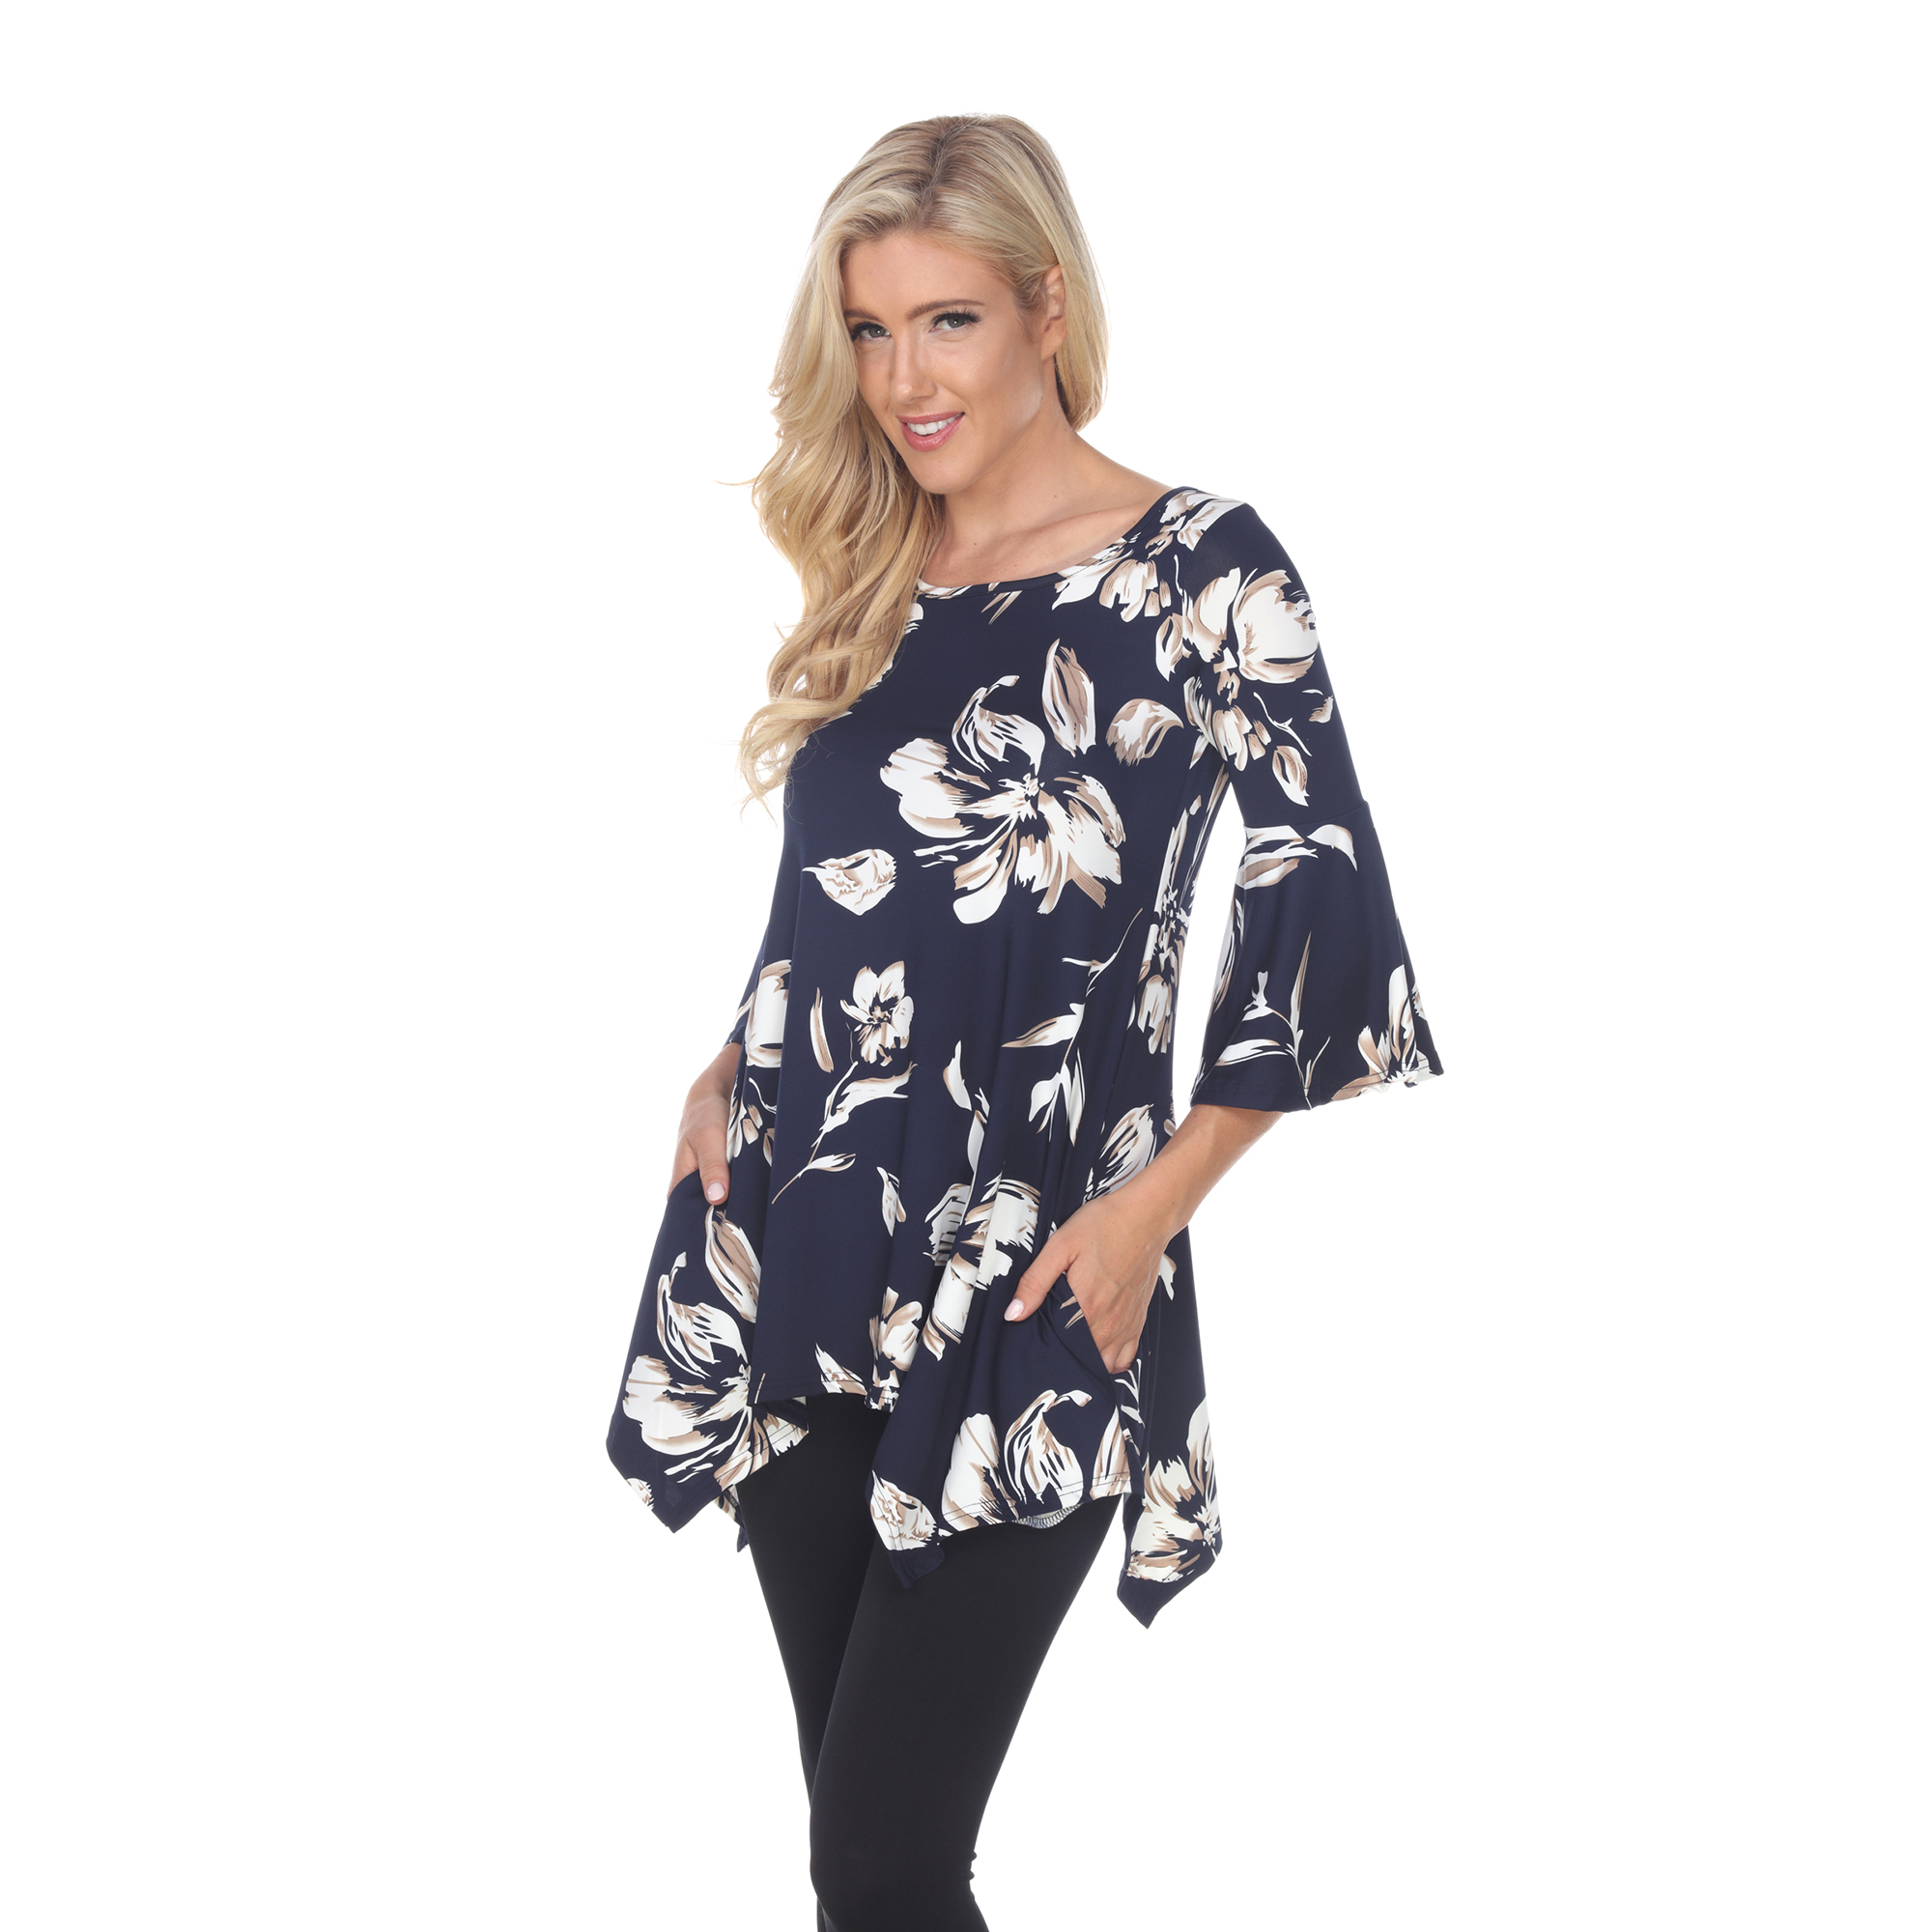 White Mark Women's Floral Print Quarter Sleeve Tunic Top With Pockets - Navy, Medium